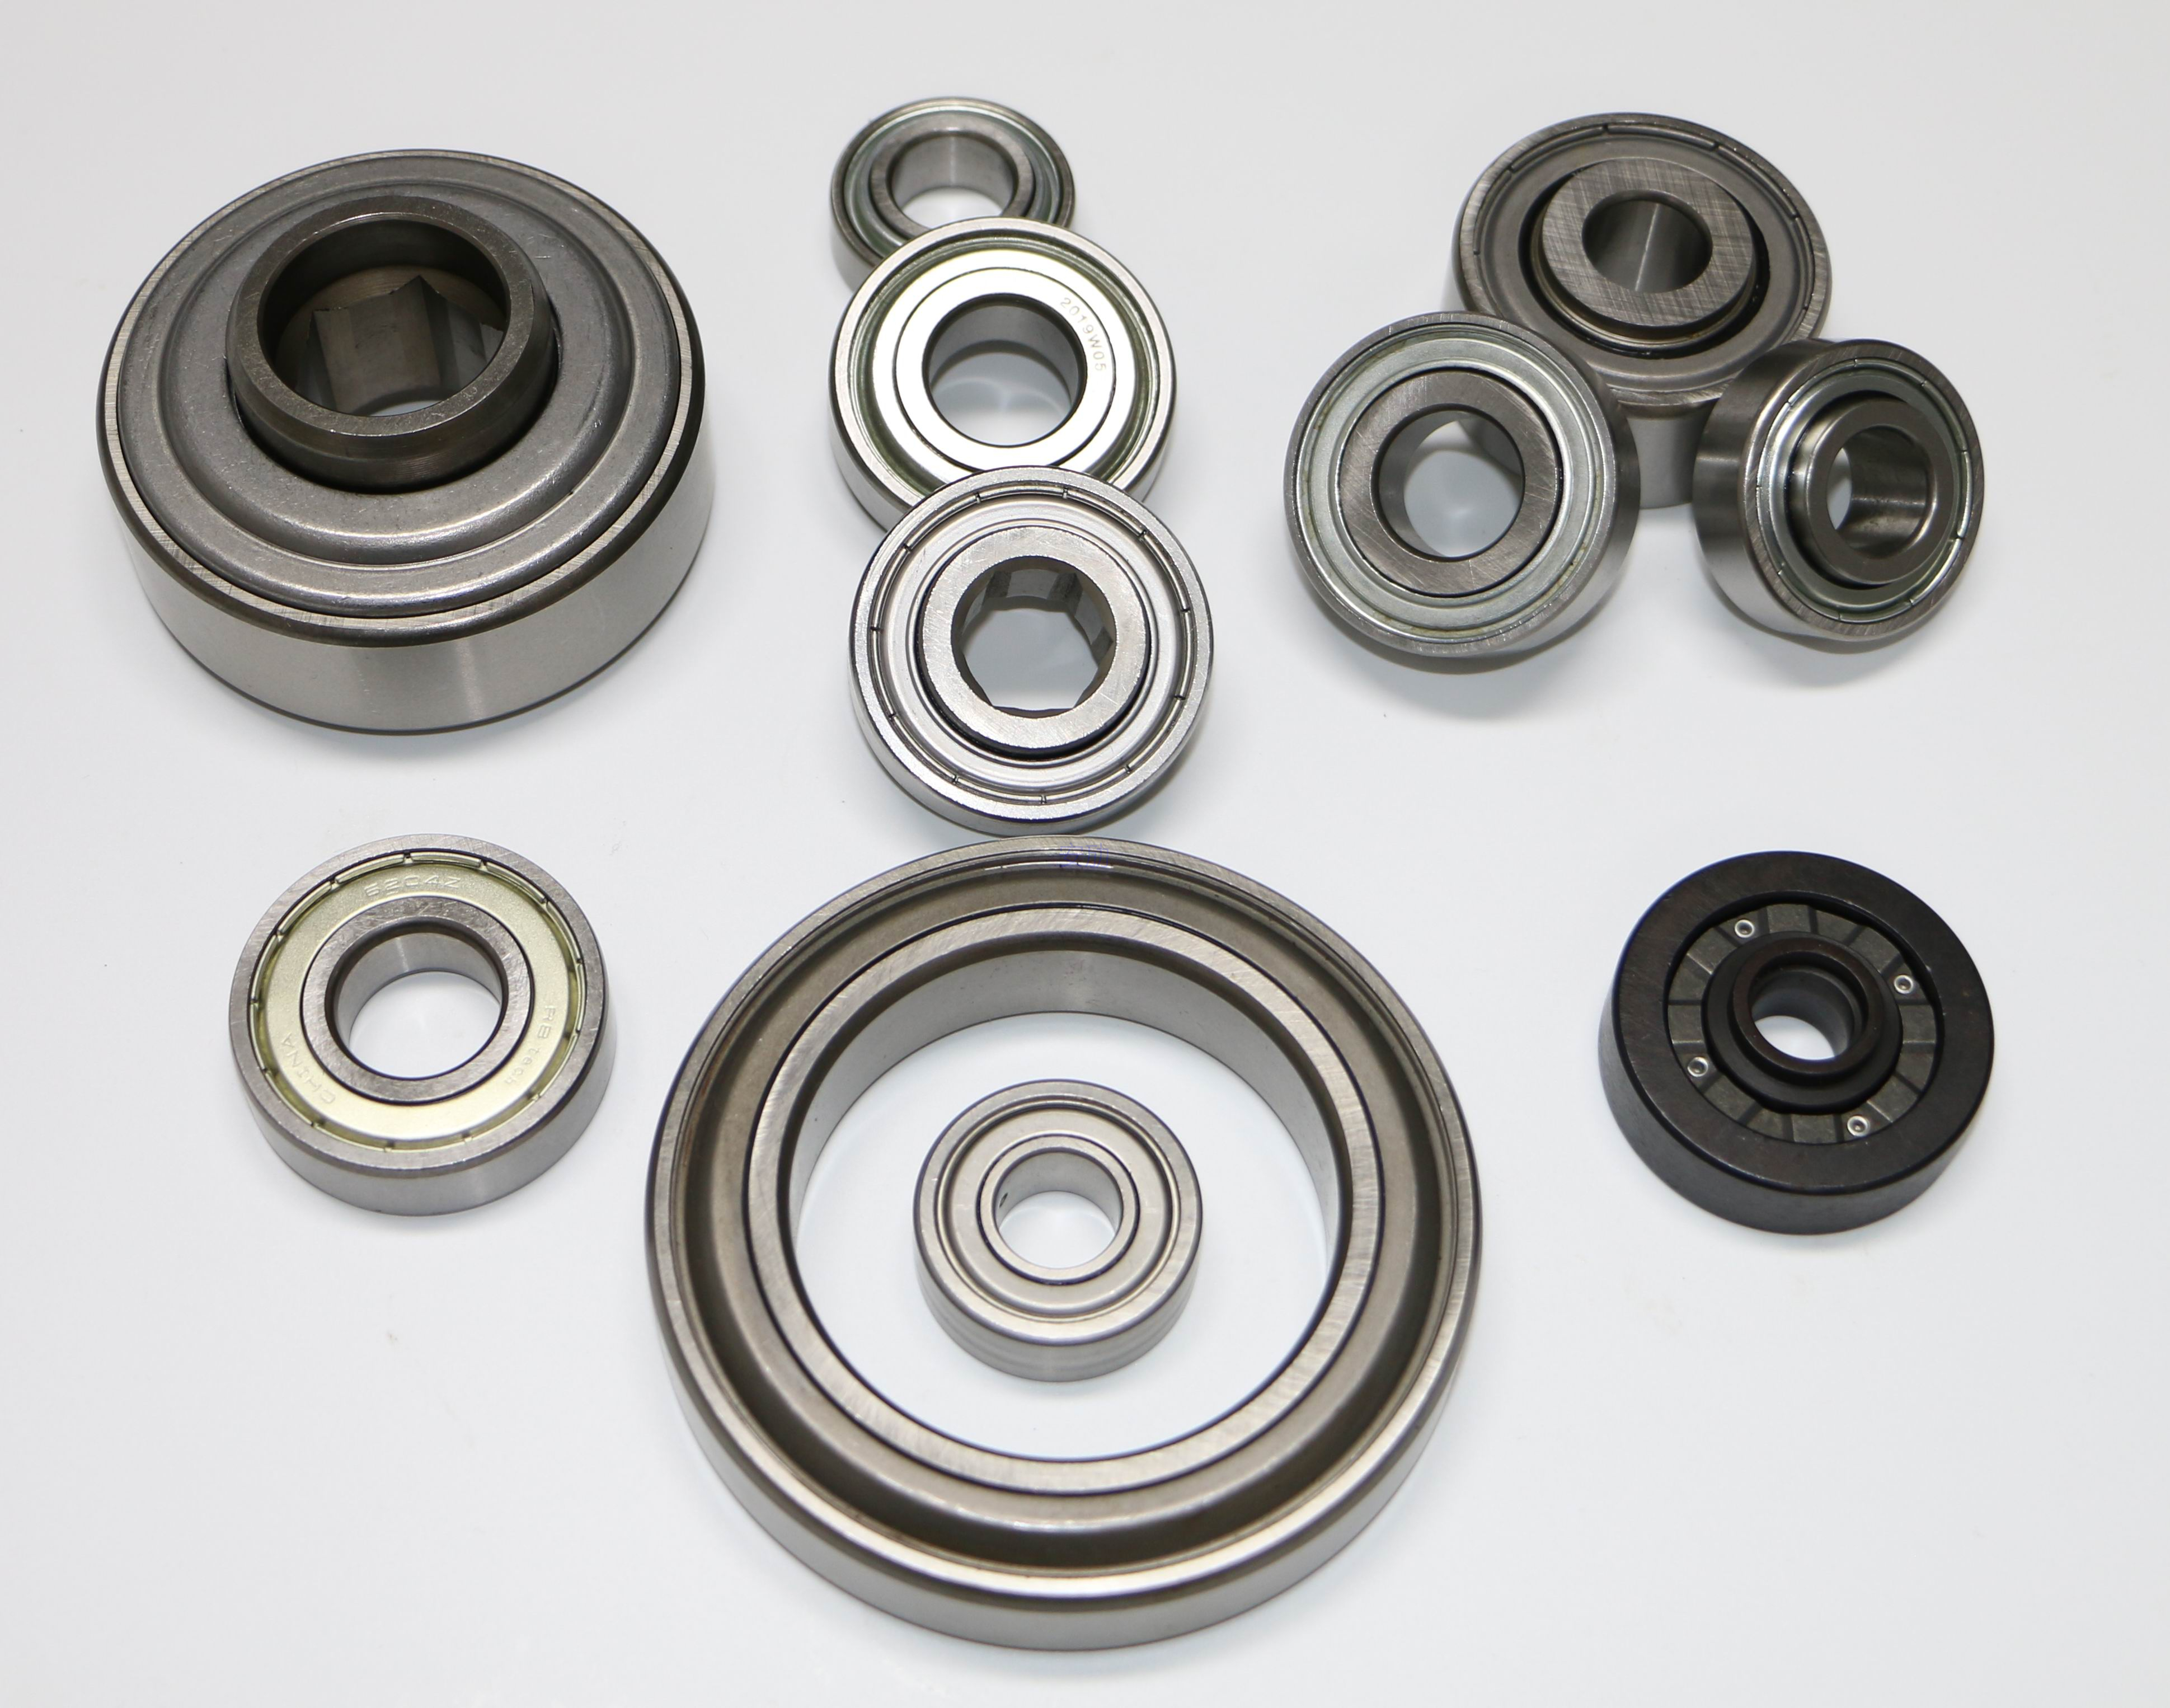 Agricultural Machine Bearing